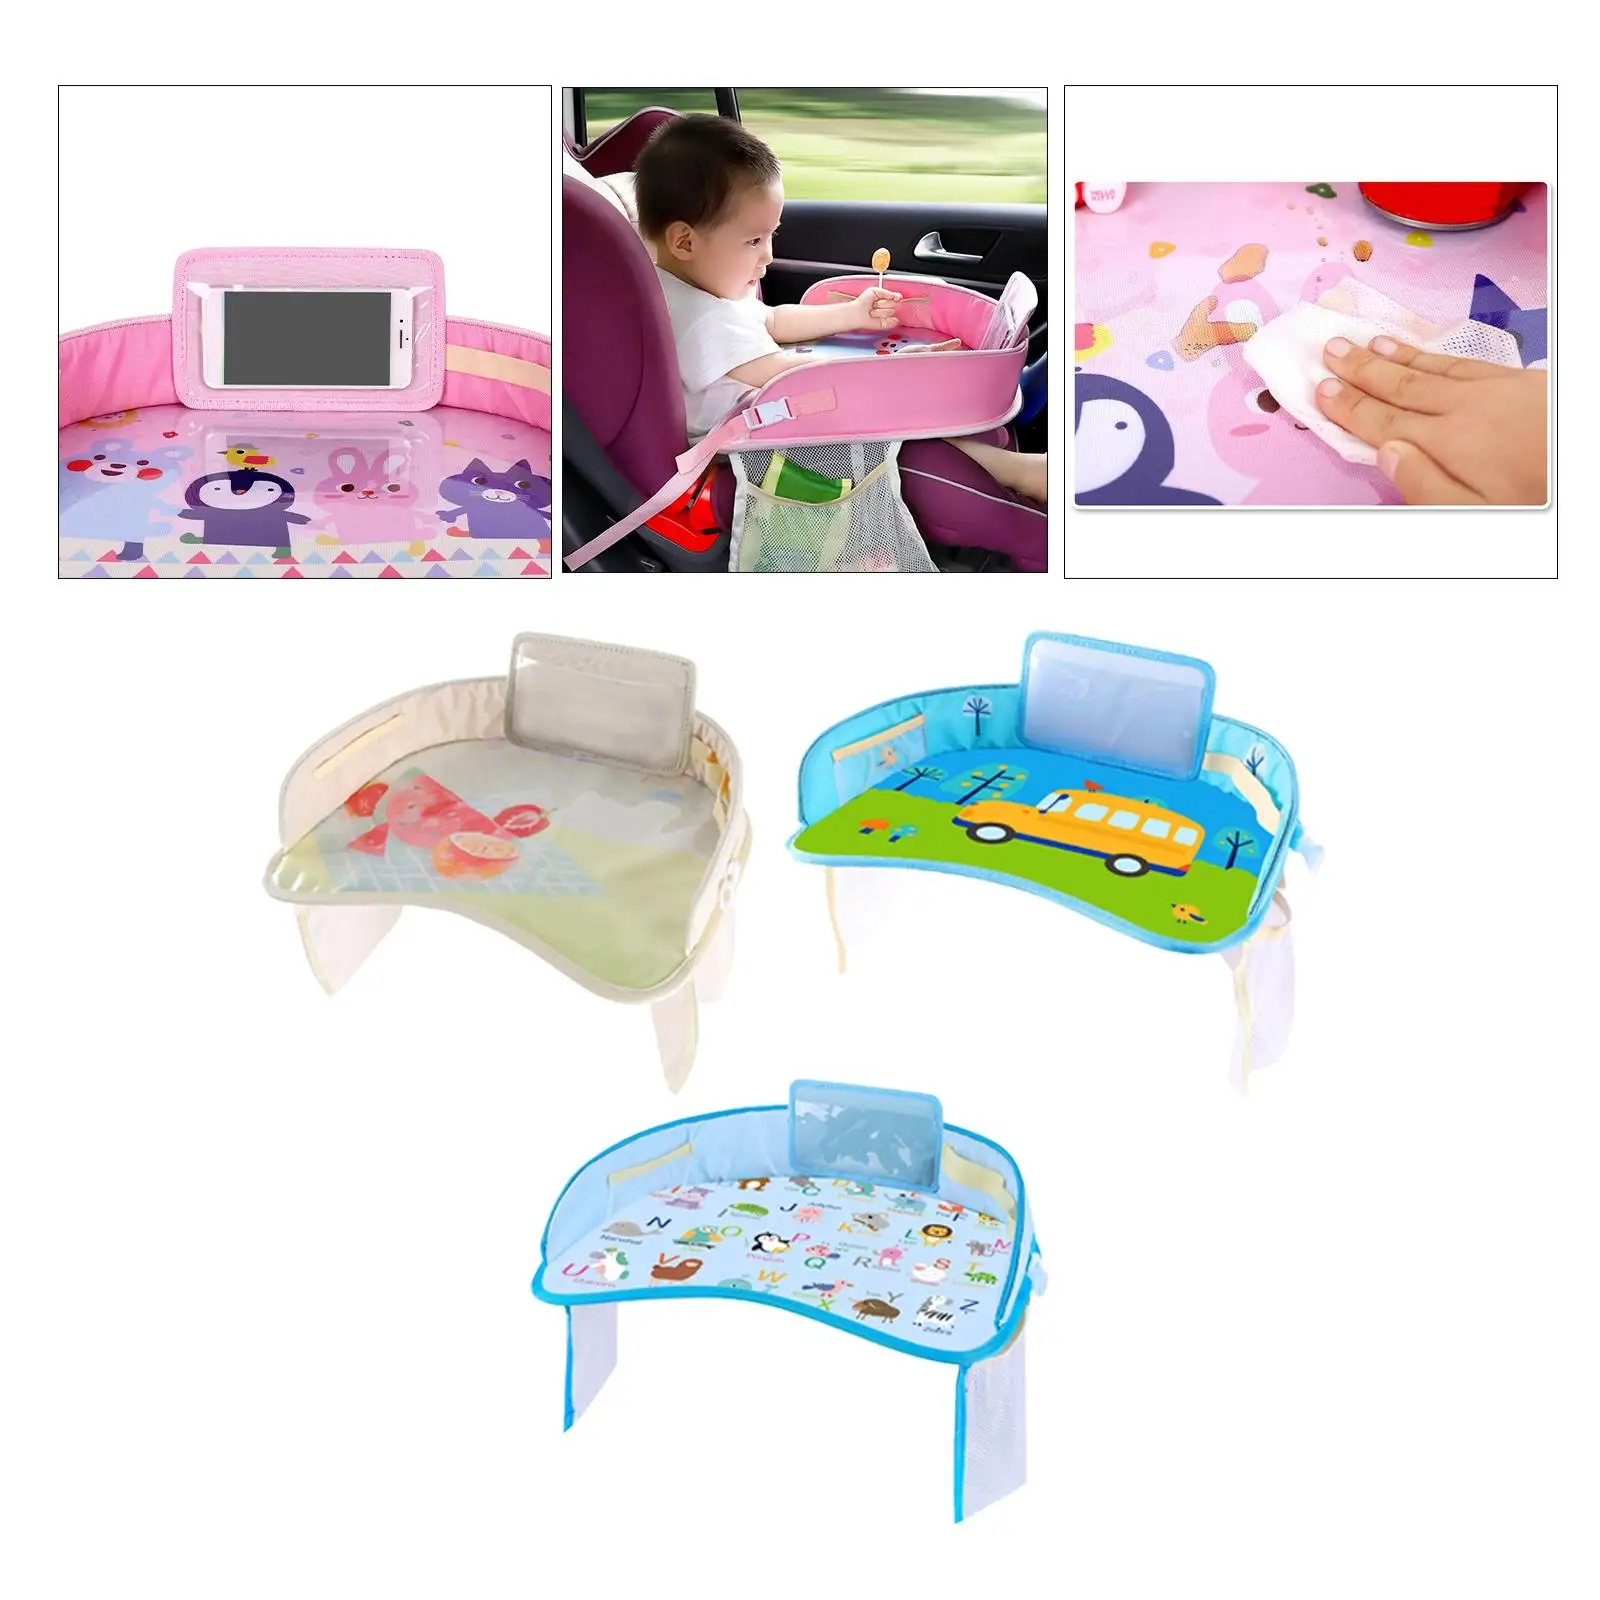  Tray for Toddler ,  Lap Tray for Girl and Boy Activities,  Large Tablet Holder Stand  Pocket